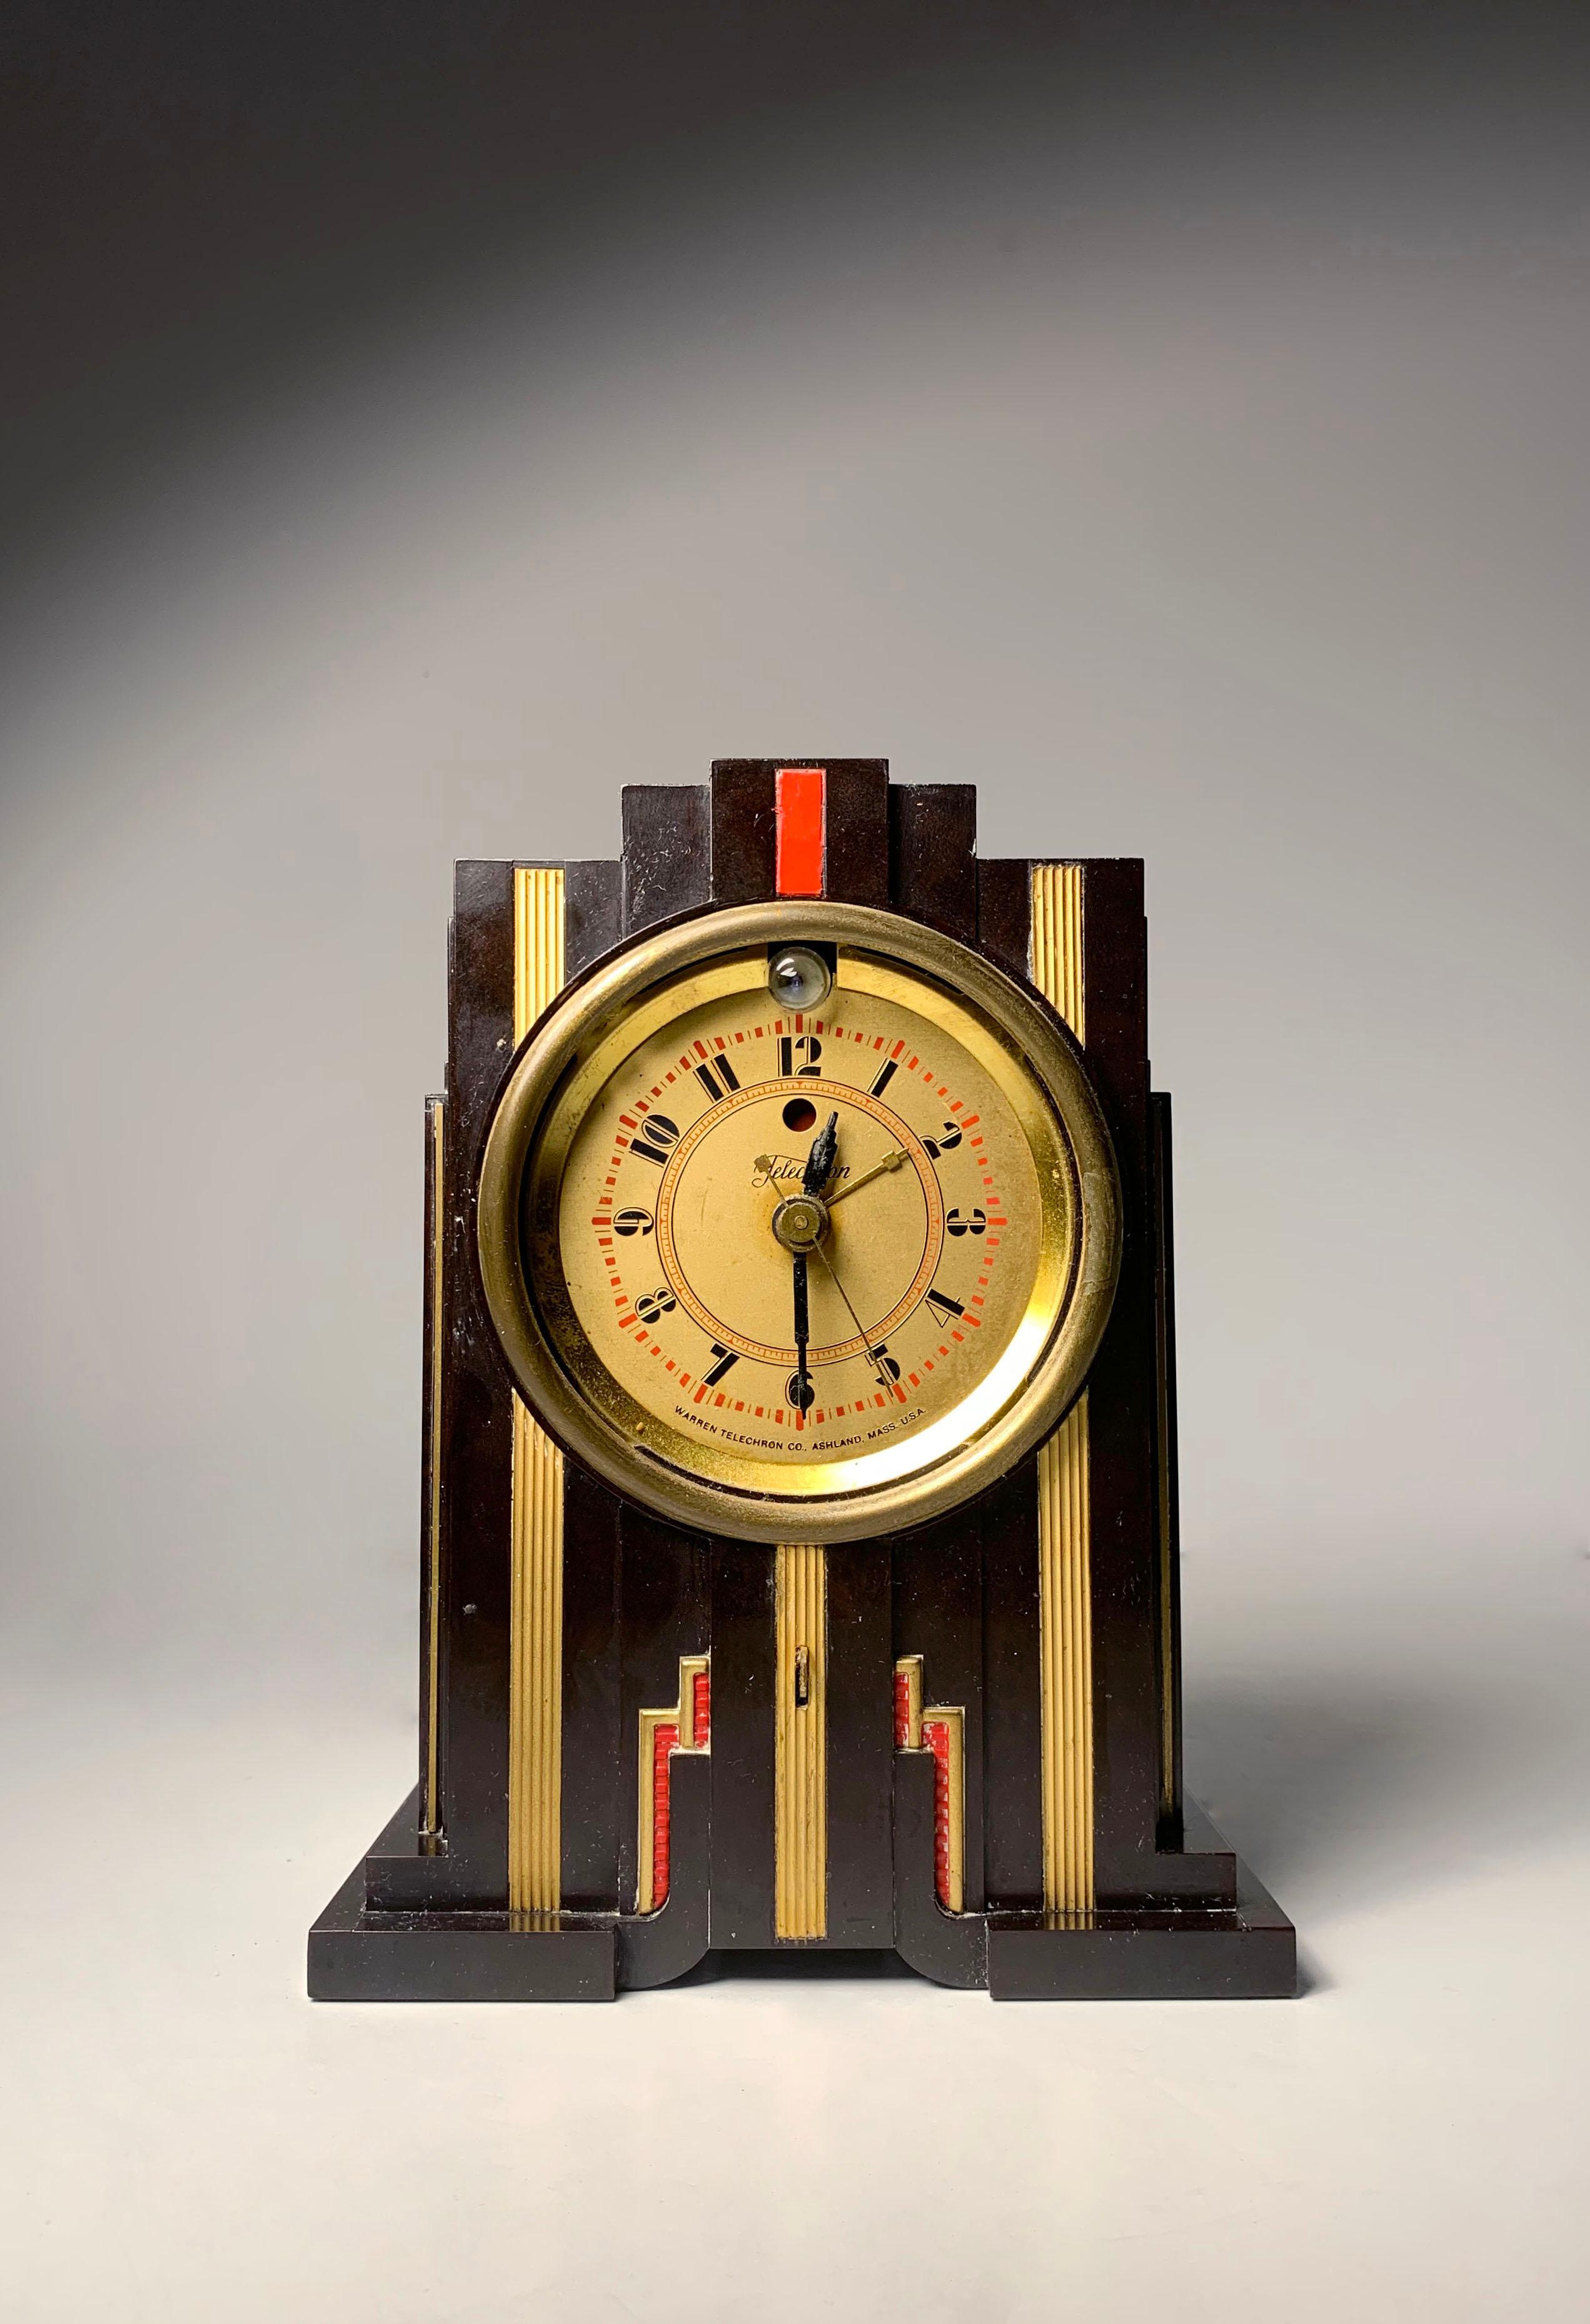 Beautiful Period Art Deco Bakelite Telechron Clock in the manner of Paul Frankl

As Found Condition. Missing the glass lens. the metal piece in front is loose. Most importantly, Walnut Bakelite appears to be in very clean condition.  Am assuming the